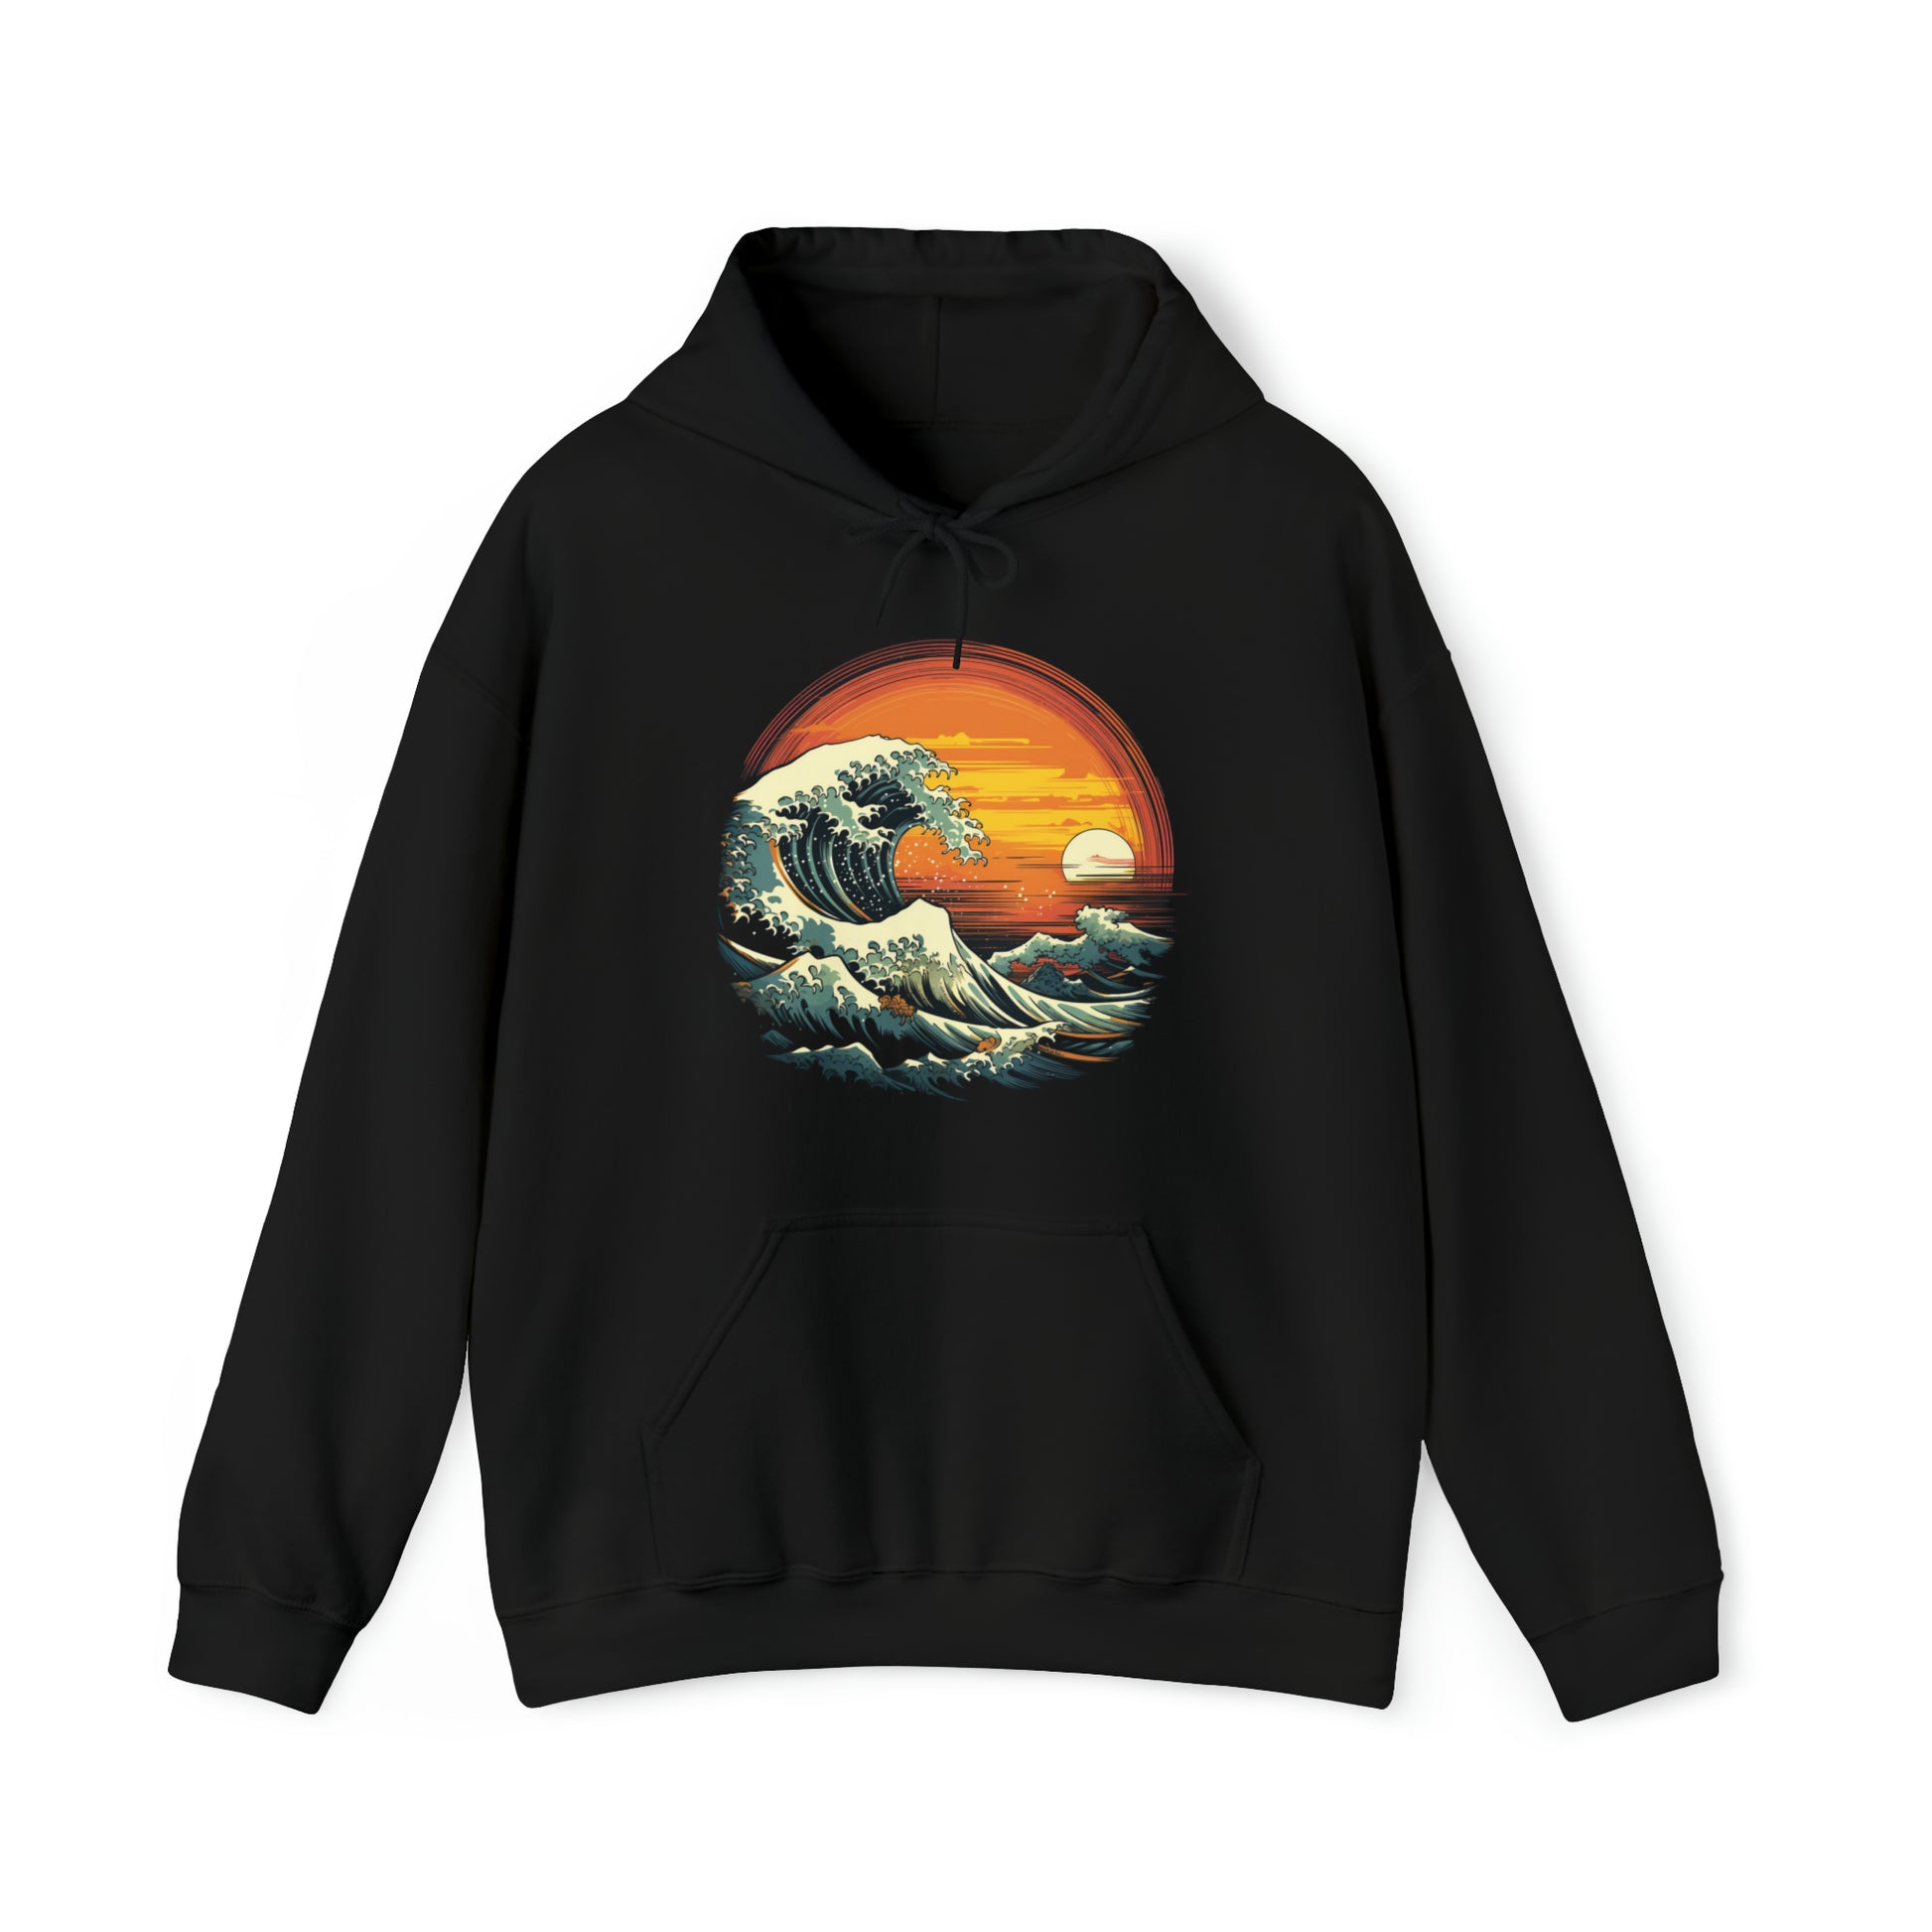 The Great Wave Hoodie, Surf Ocean Sea Japanese Pullover Men Women Adult Aesthetic Graphic Cotton Hooded Sweatshirt Pockets Starcove Fashion